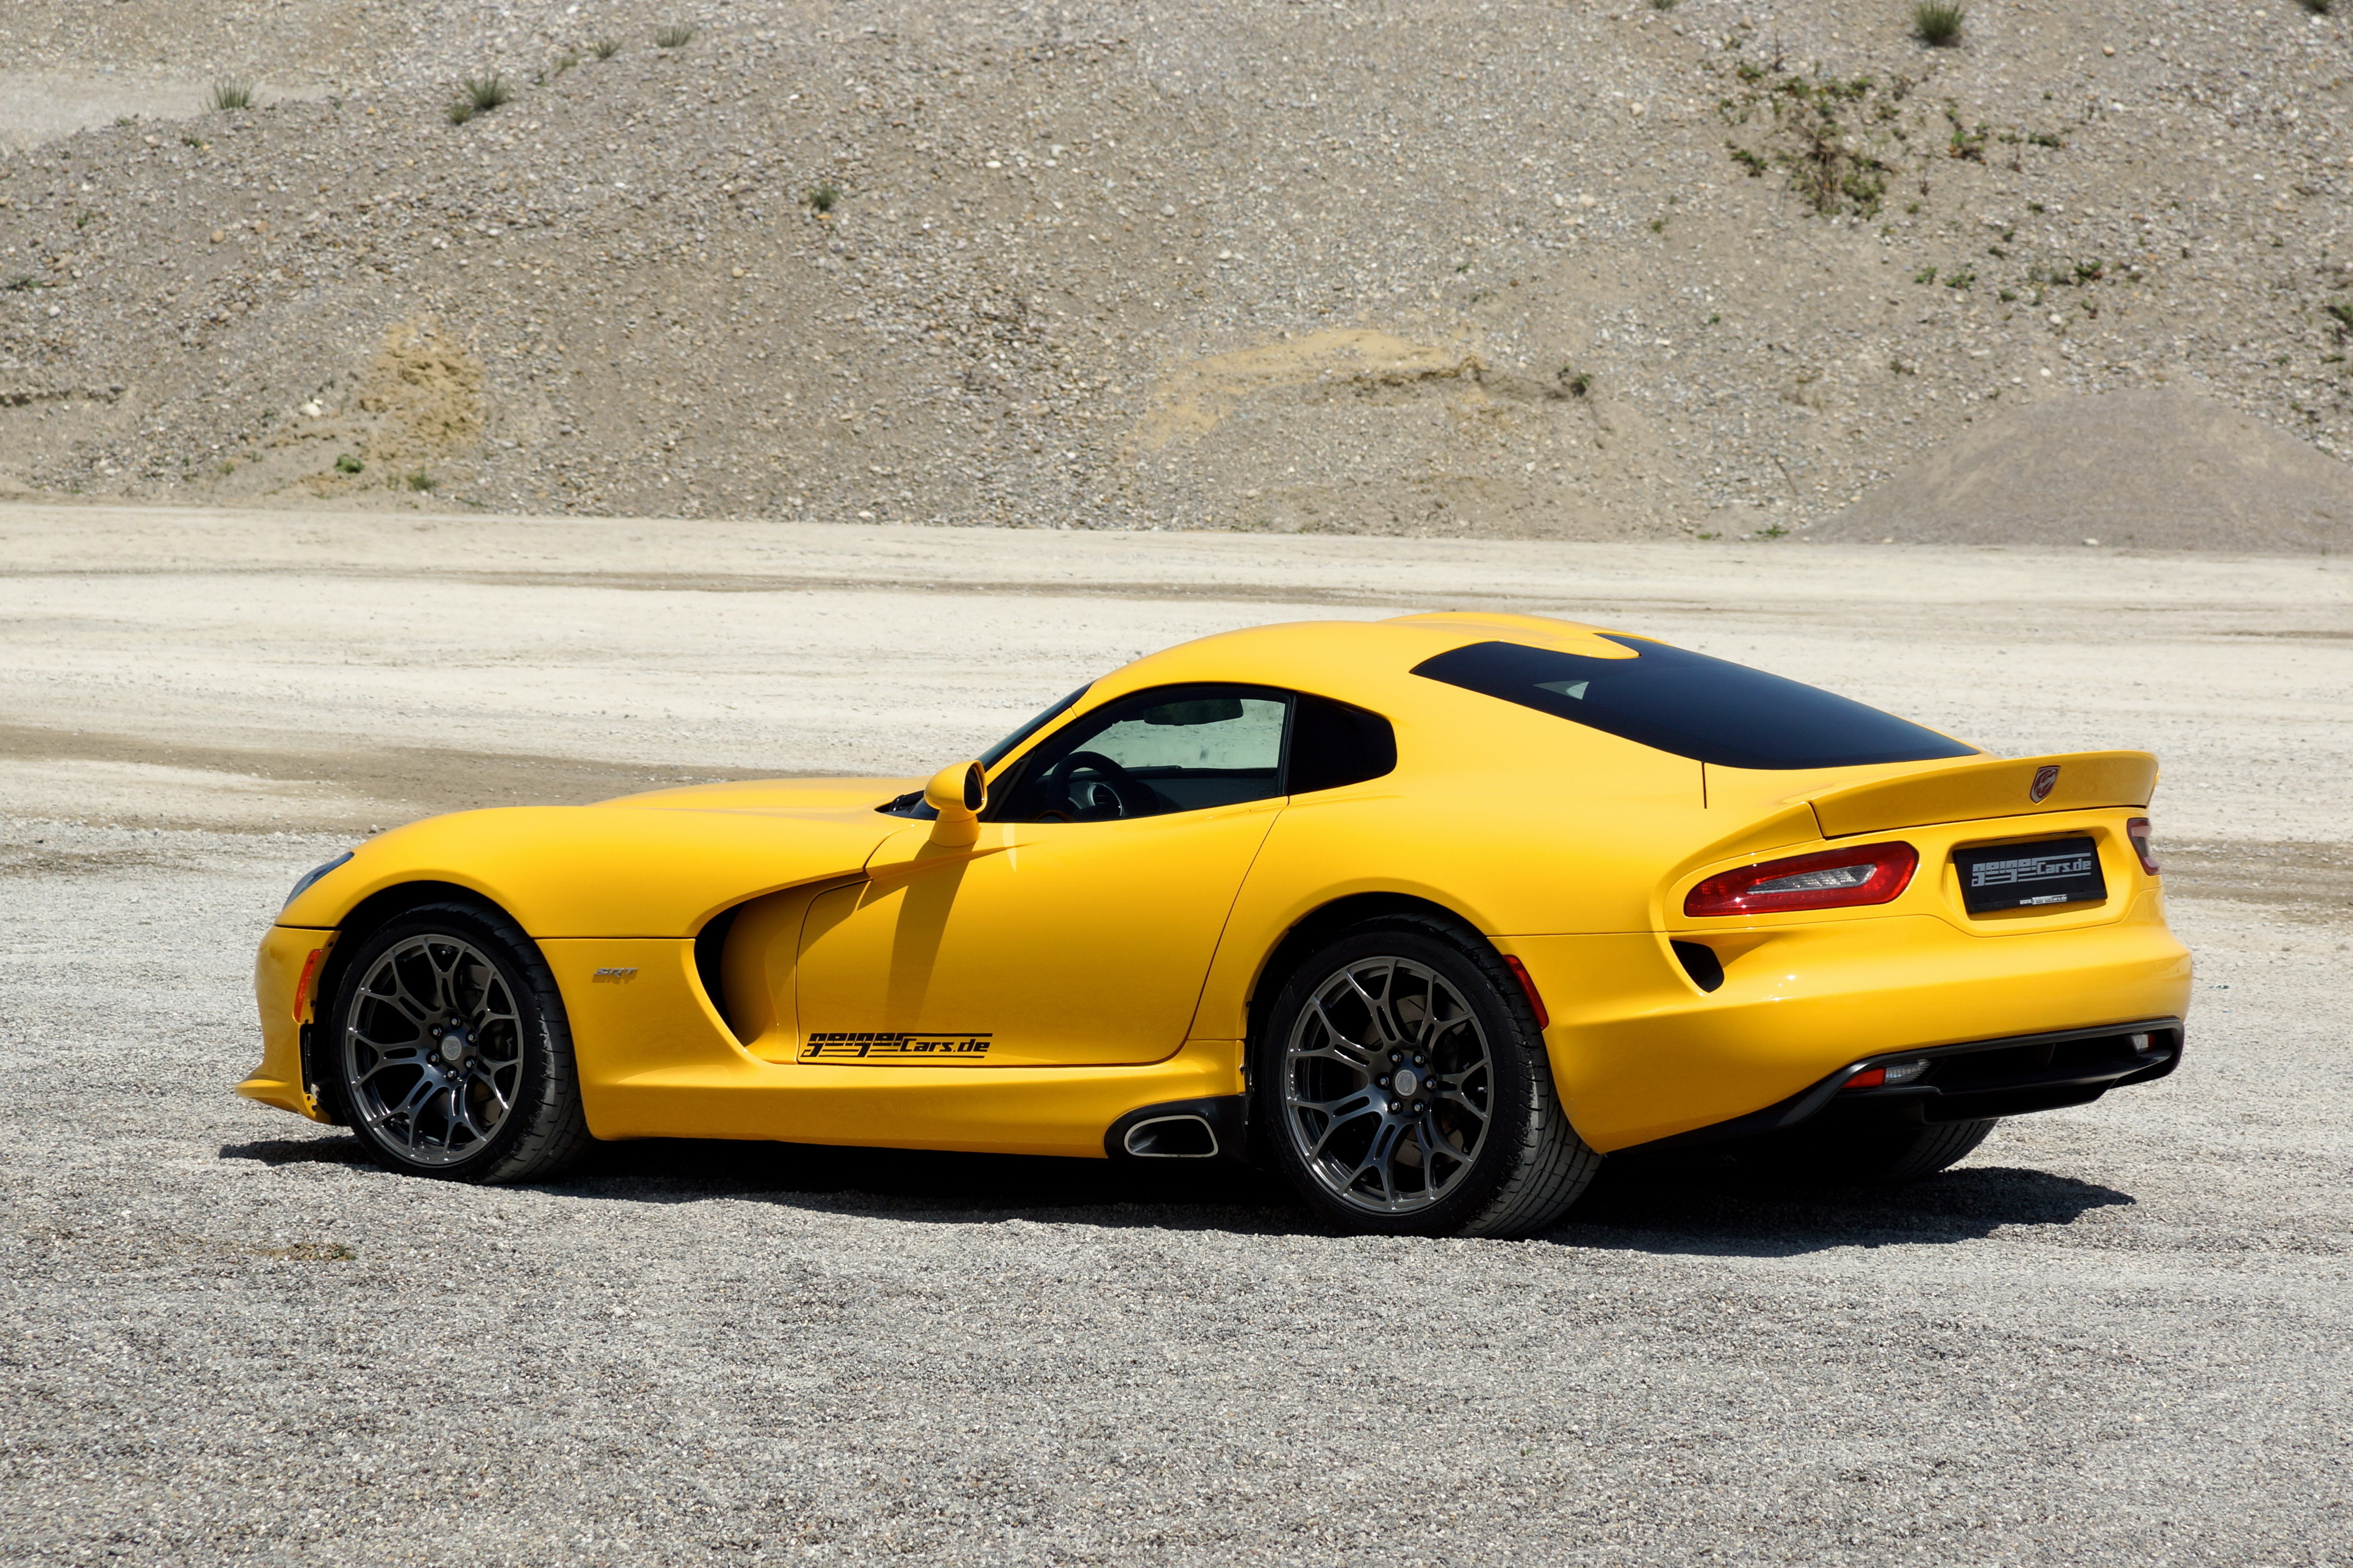 Cool HD Wallpaper yellow, viper, side view, geiger